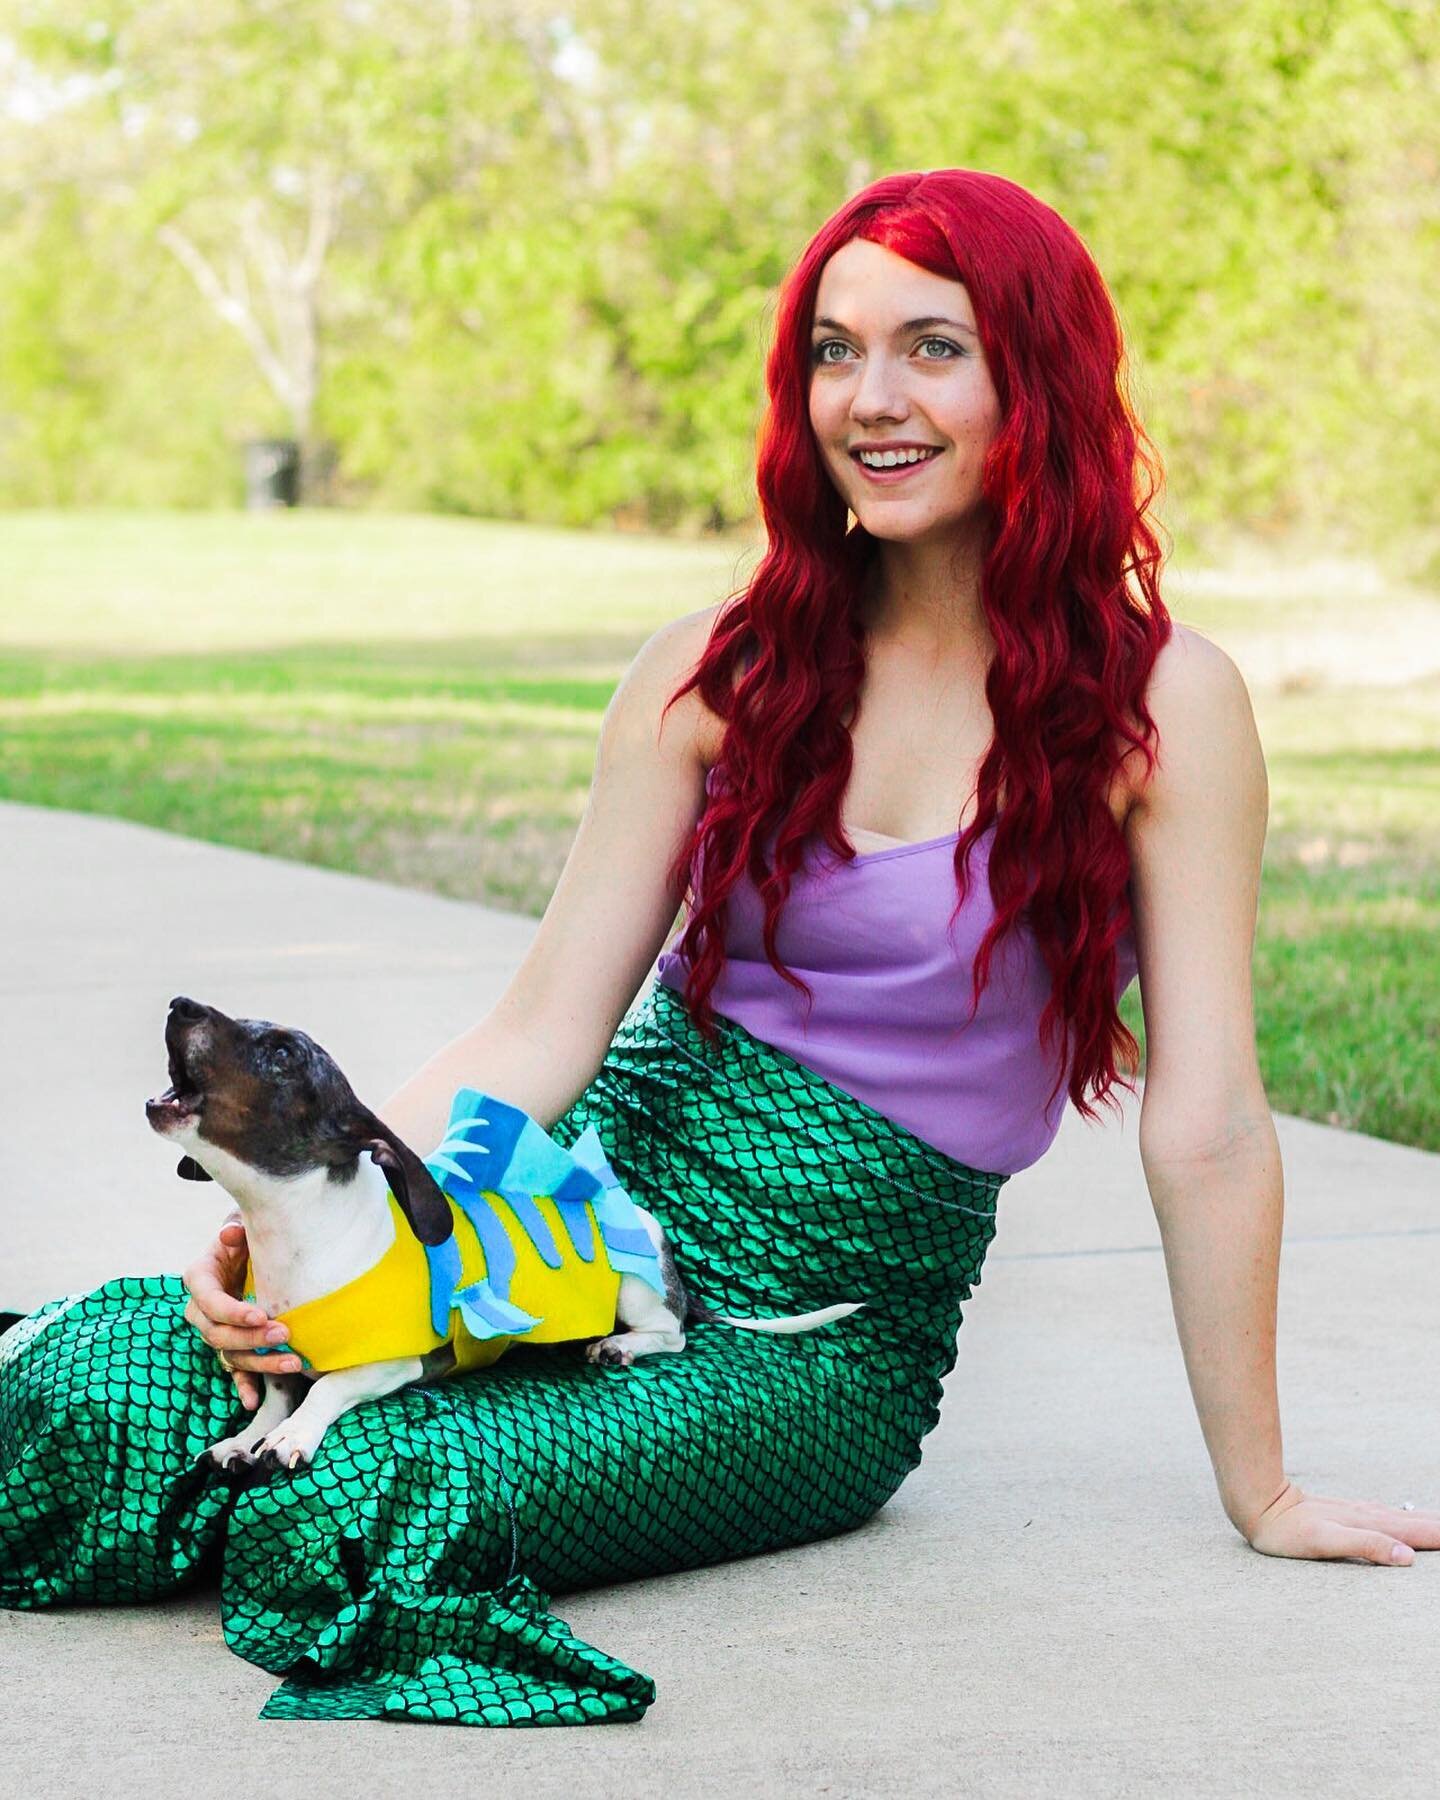 Happy Howl-o-weenie from Dox &amp; co.! If you haven&rsquo;t met me then hello! I normally don&rsquo;t have red hair, but I do love dressing up! In addition to photography I&rsquo;m also pretty crafty and made my Ariel, mermaid skirt and my pup&rsquo